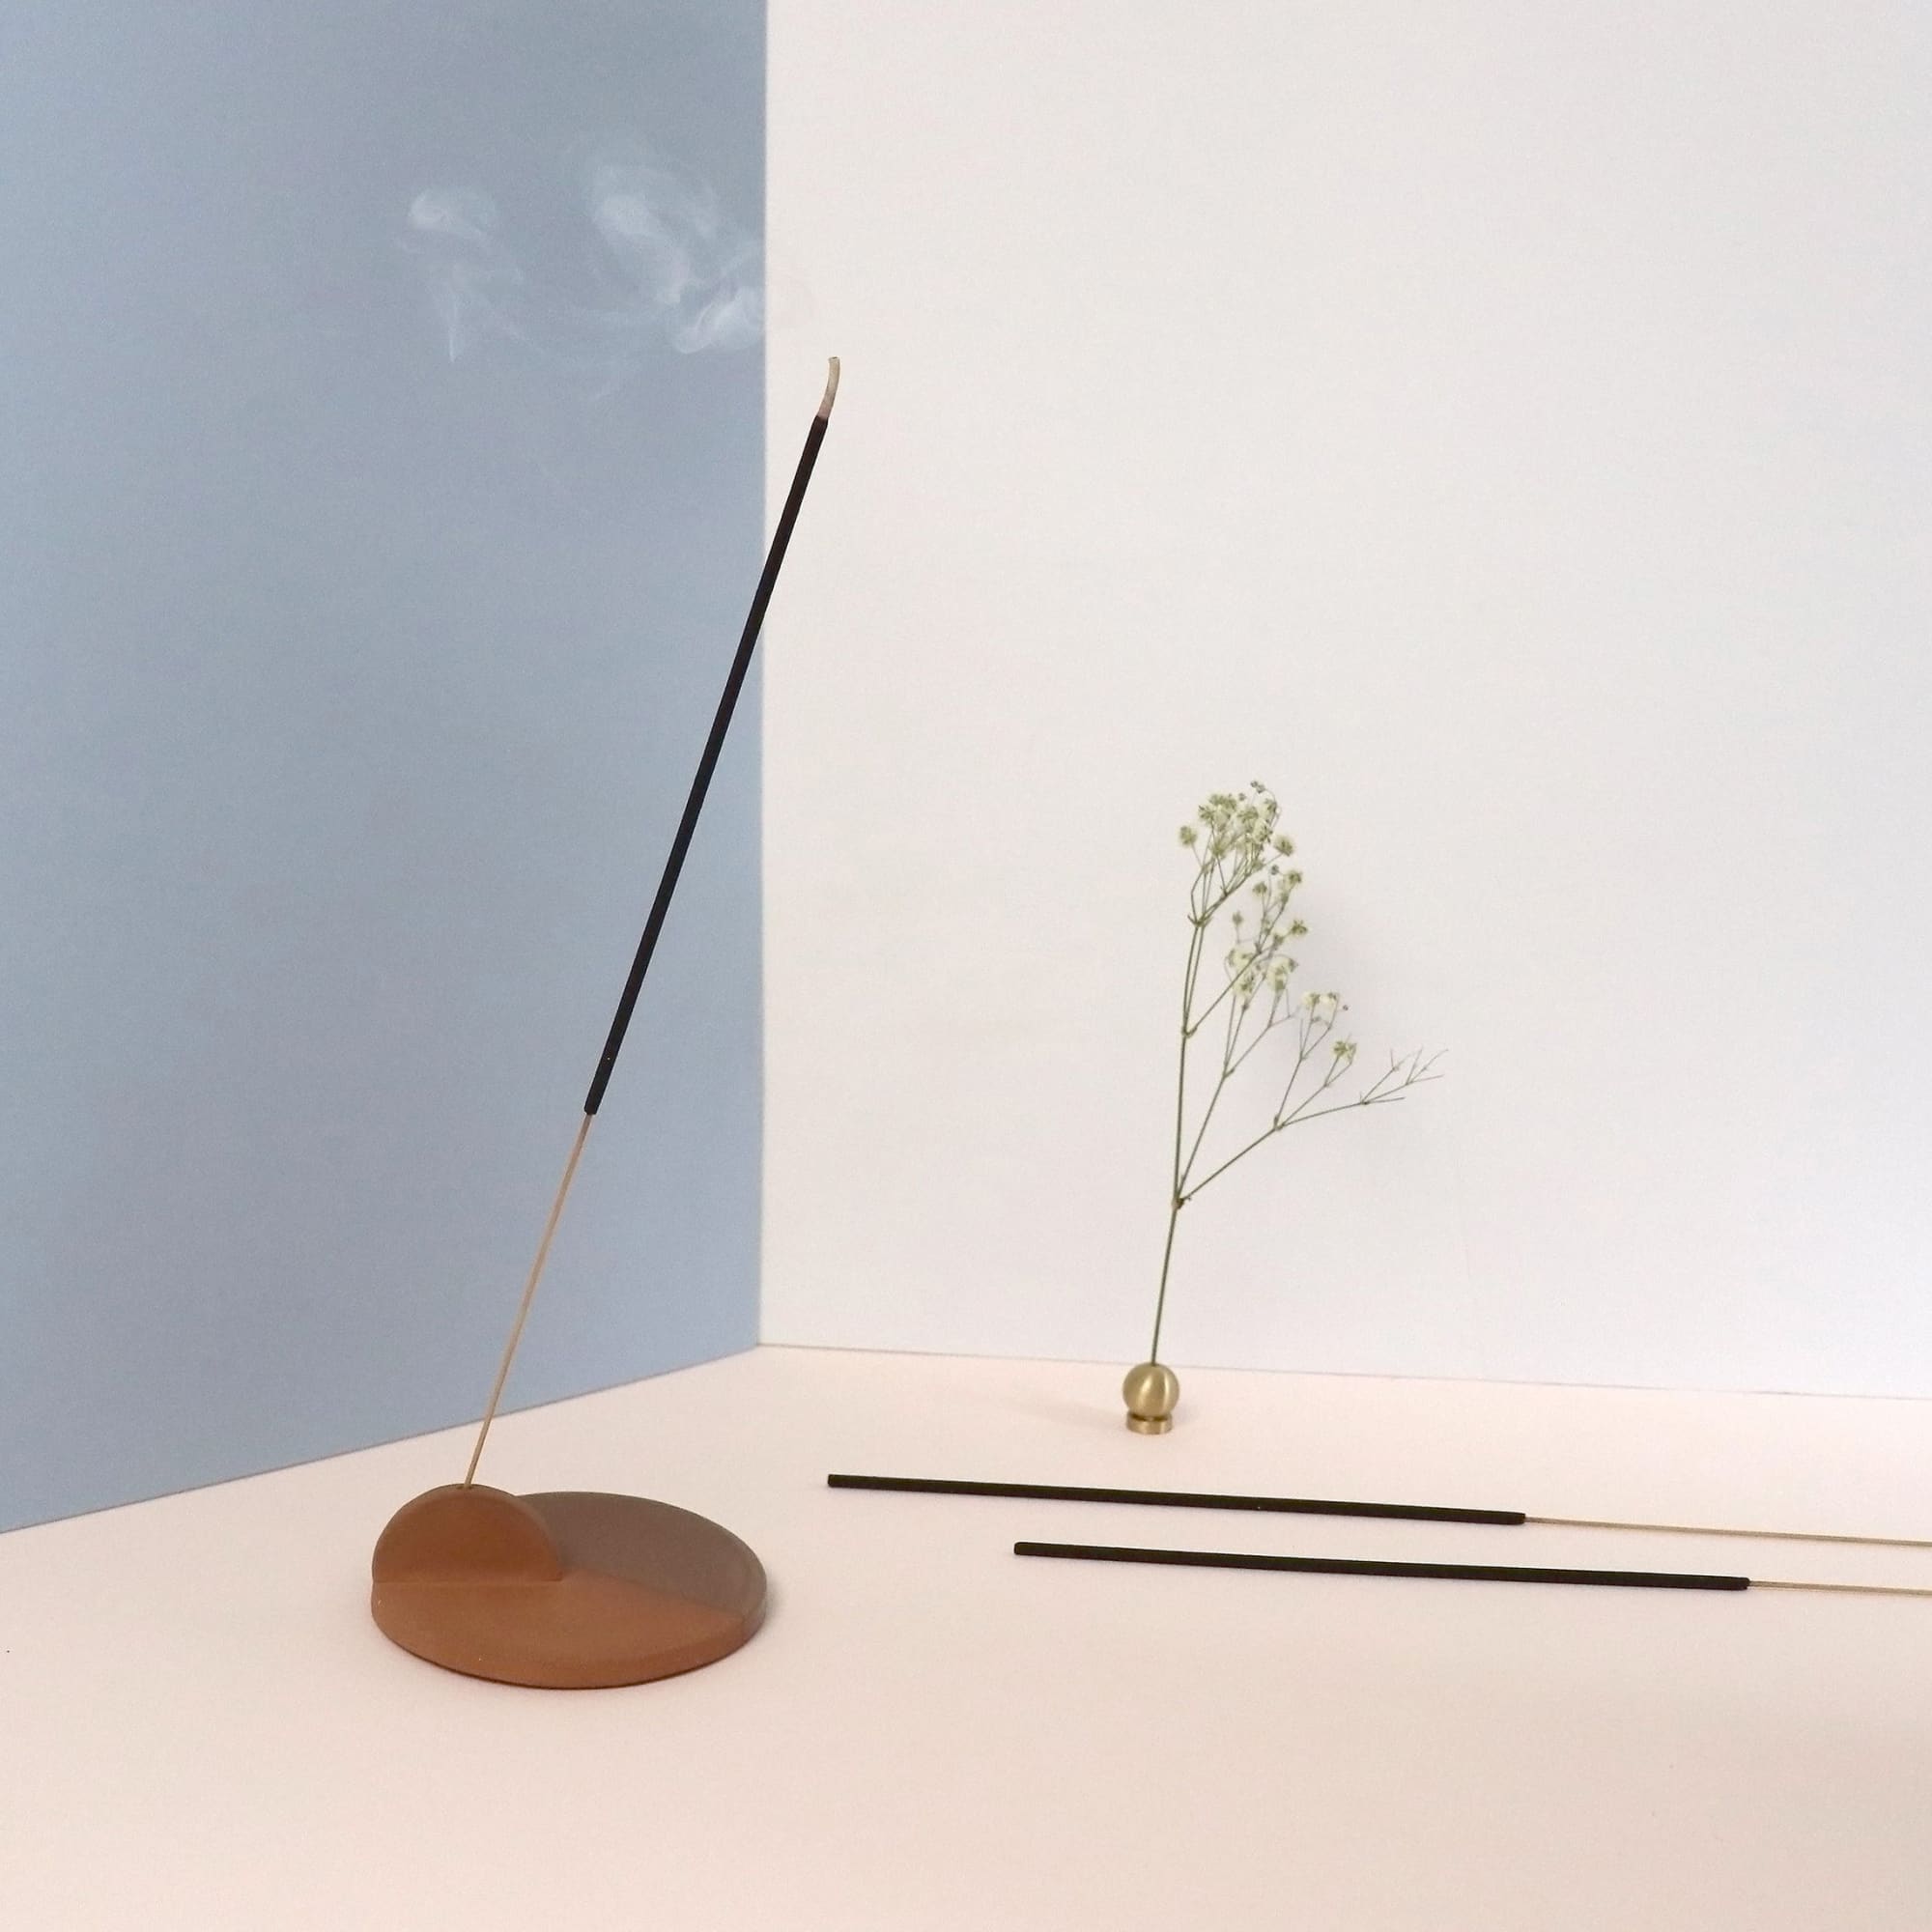 An incense stick burning slowly in an incense holder